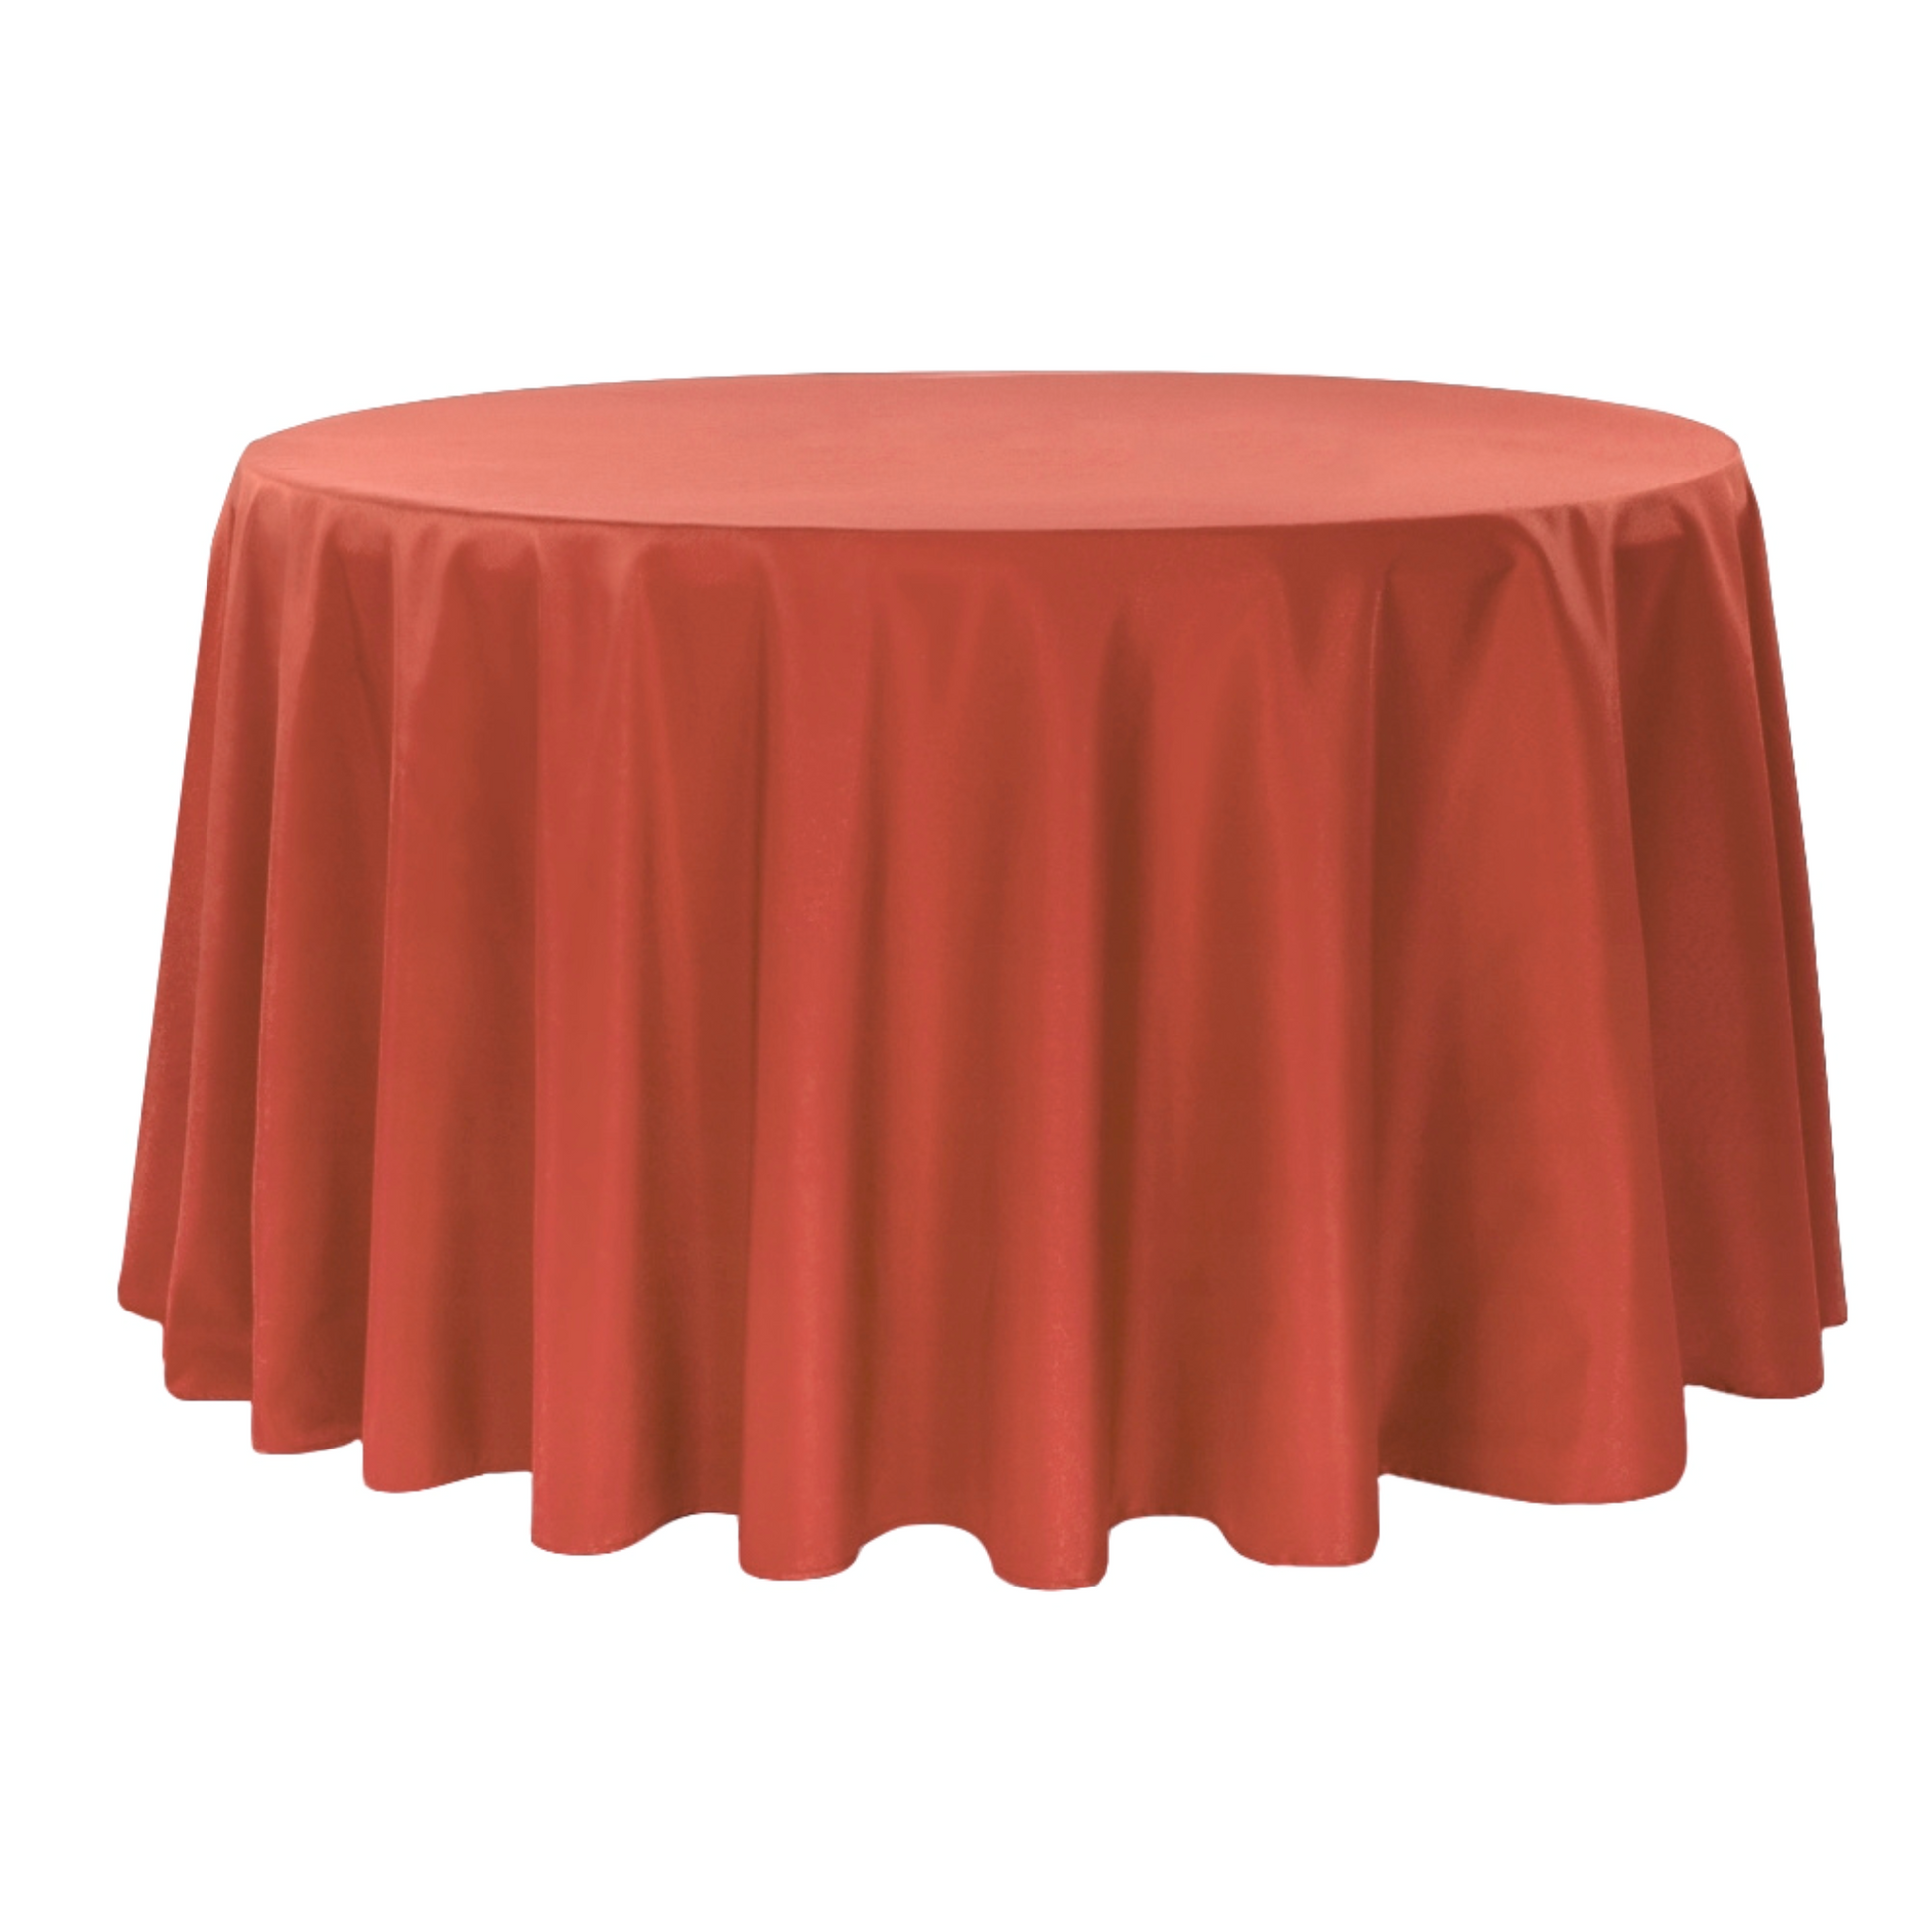 Polyester 108" Round Tablecloth - Rust